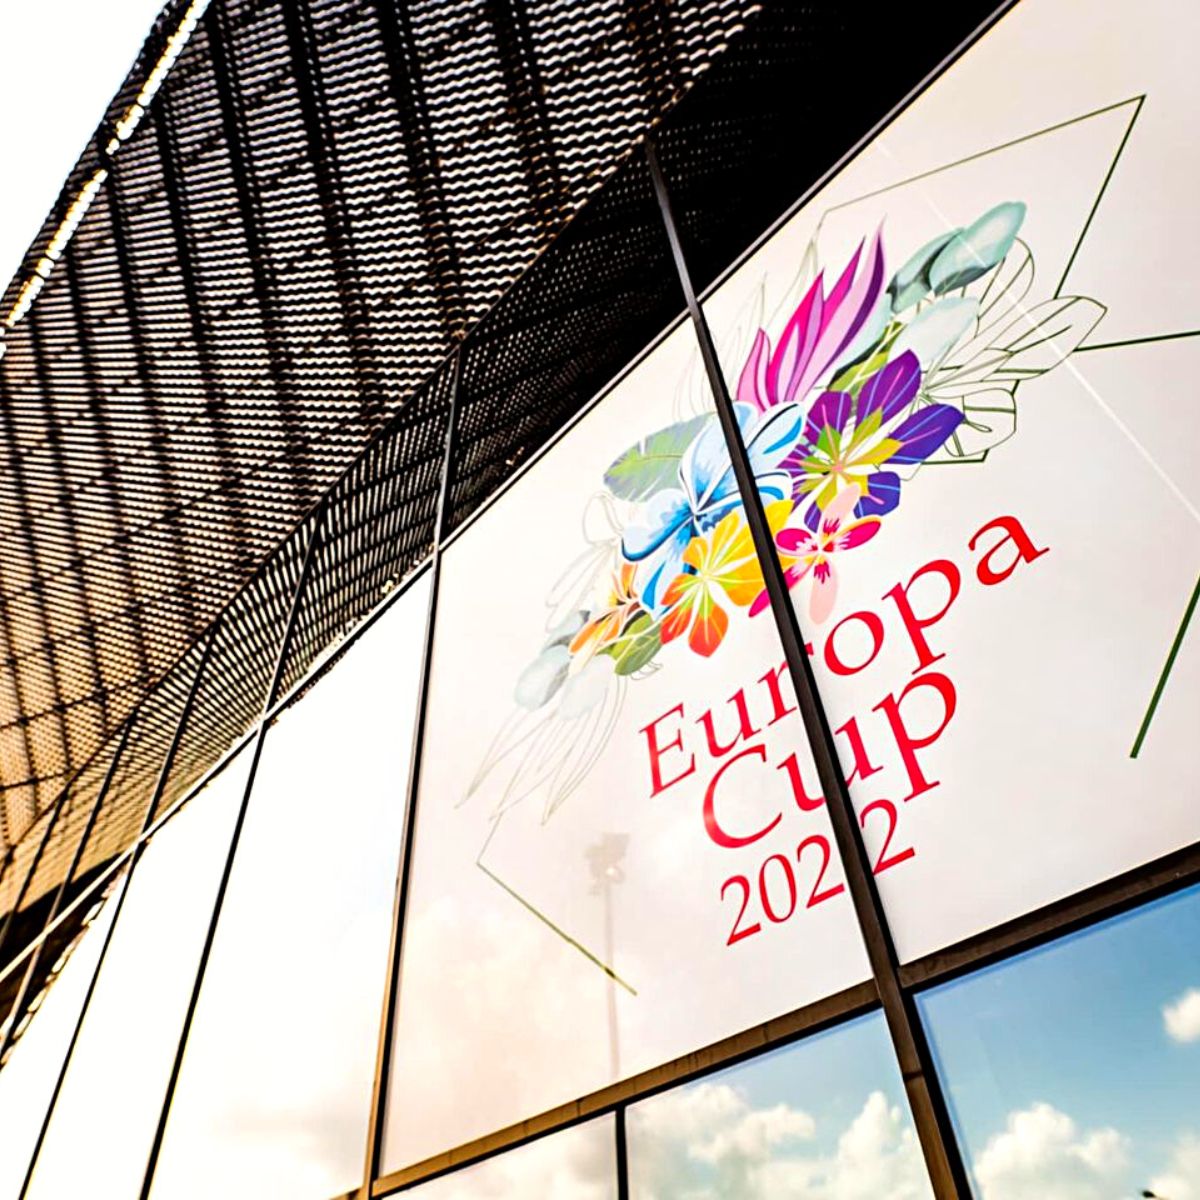 whats-the-program-for-florints-europa-cup-2022-in-katowice-and-who-will-win-this-prestigious-cup-featured